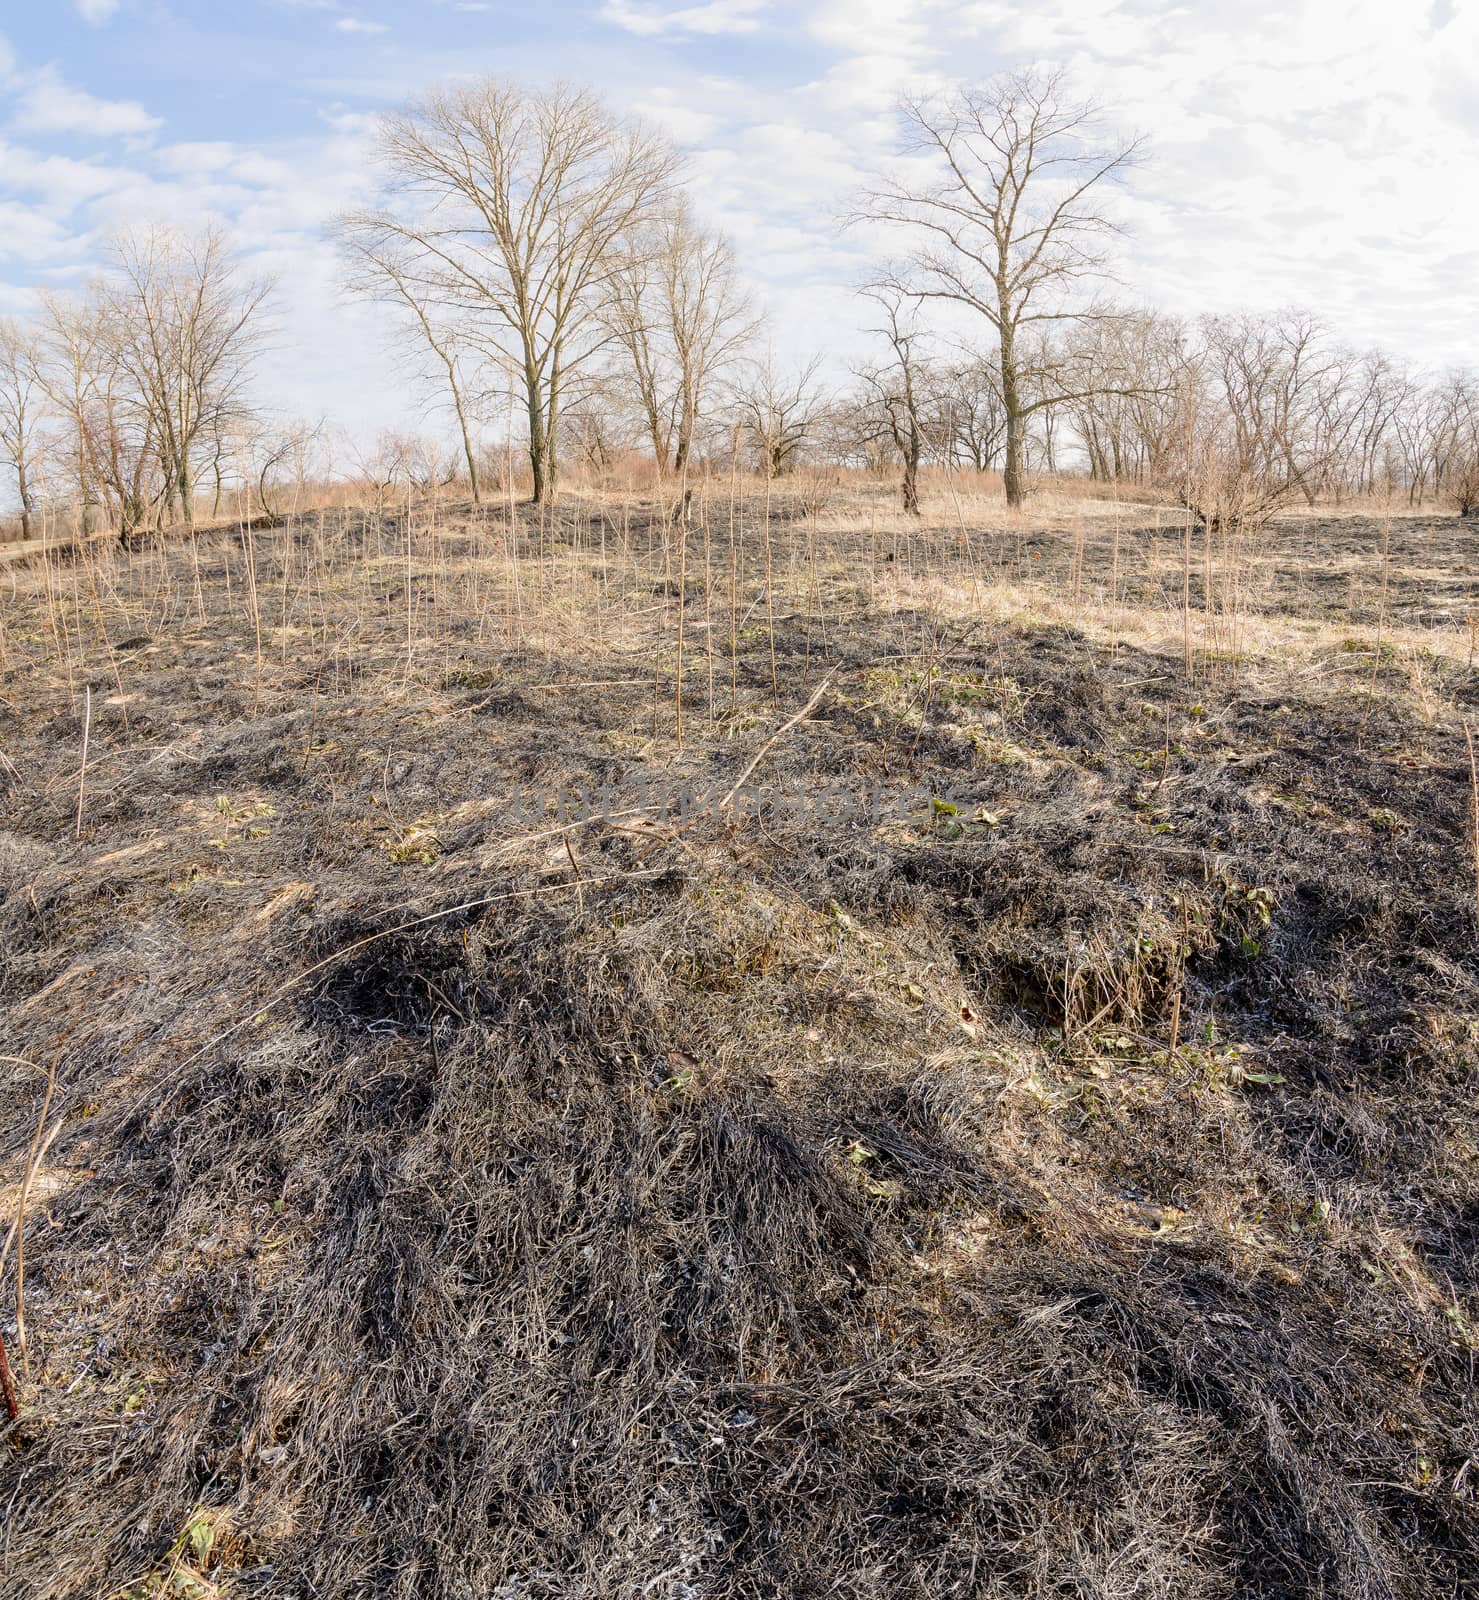 Wasteland after fire consequences: dry ground, tree roots and bushes are burnt and devastated